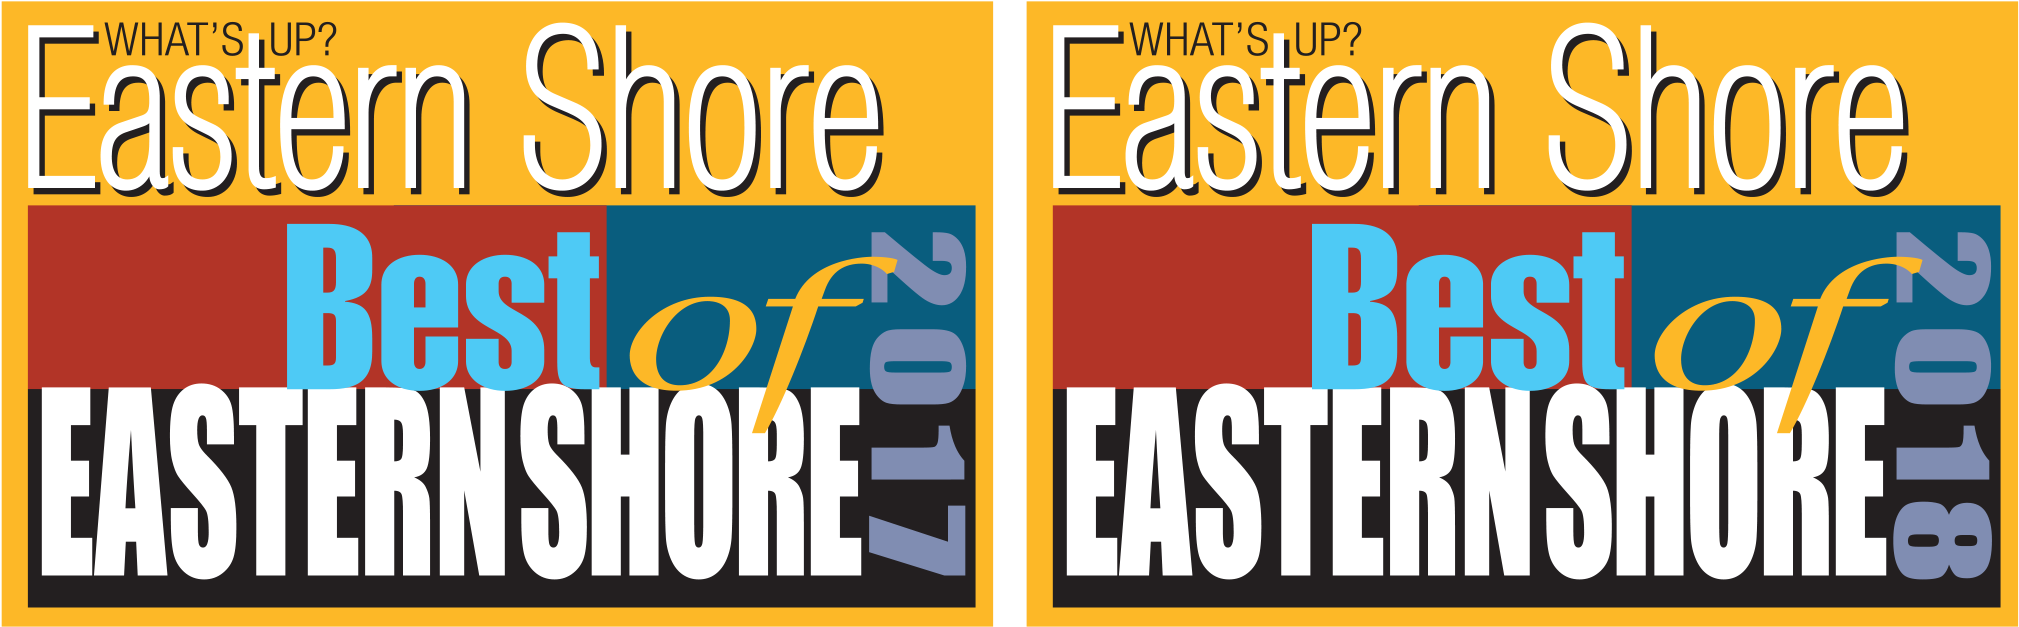 Us Best Bank Best Of Eastern Shore 2017 And 2018 Logos - Poster (2118x728), Png Download